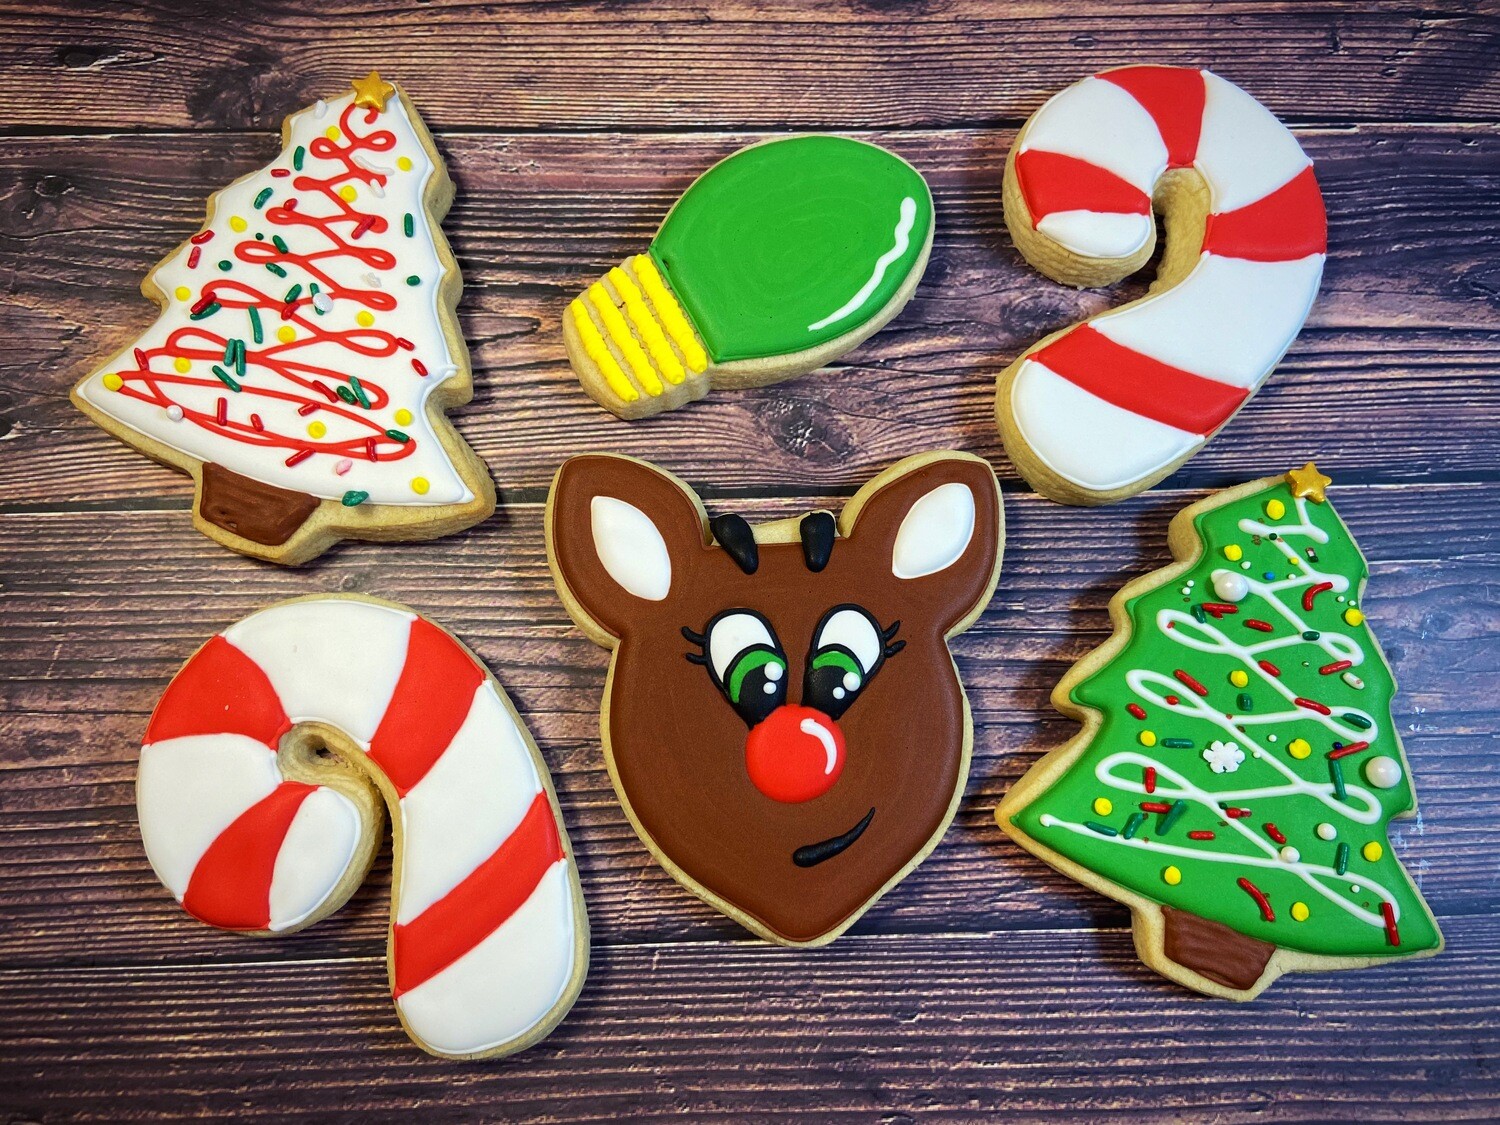 'Rudolph Christmas Decorating Workshop - THURSDAY, DECEMBER 17th at 6:30 p.m. (THE COOKIE DECORATING STUDIO)